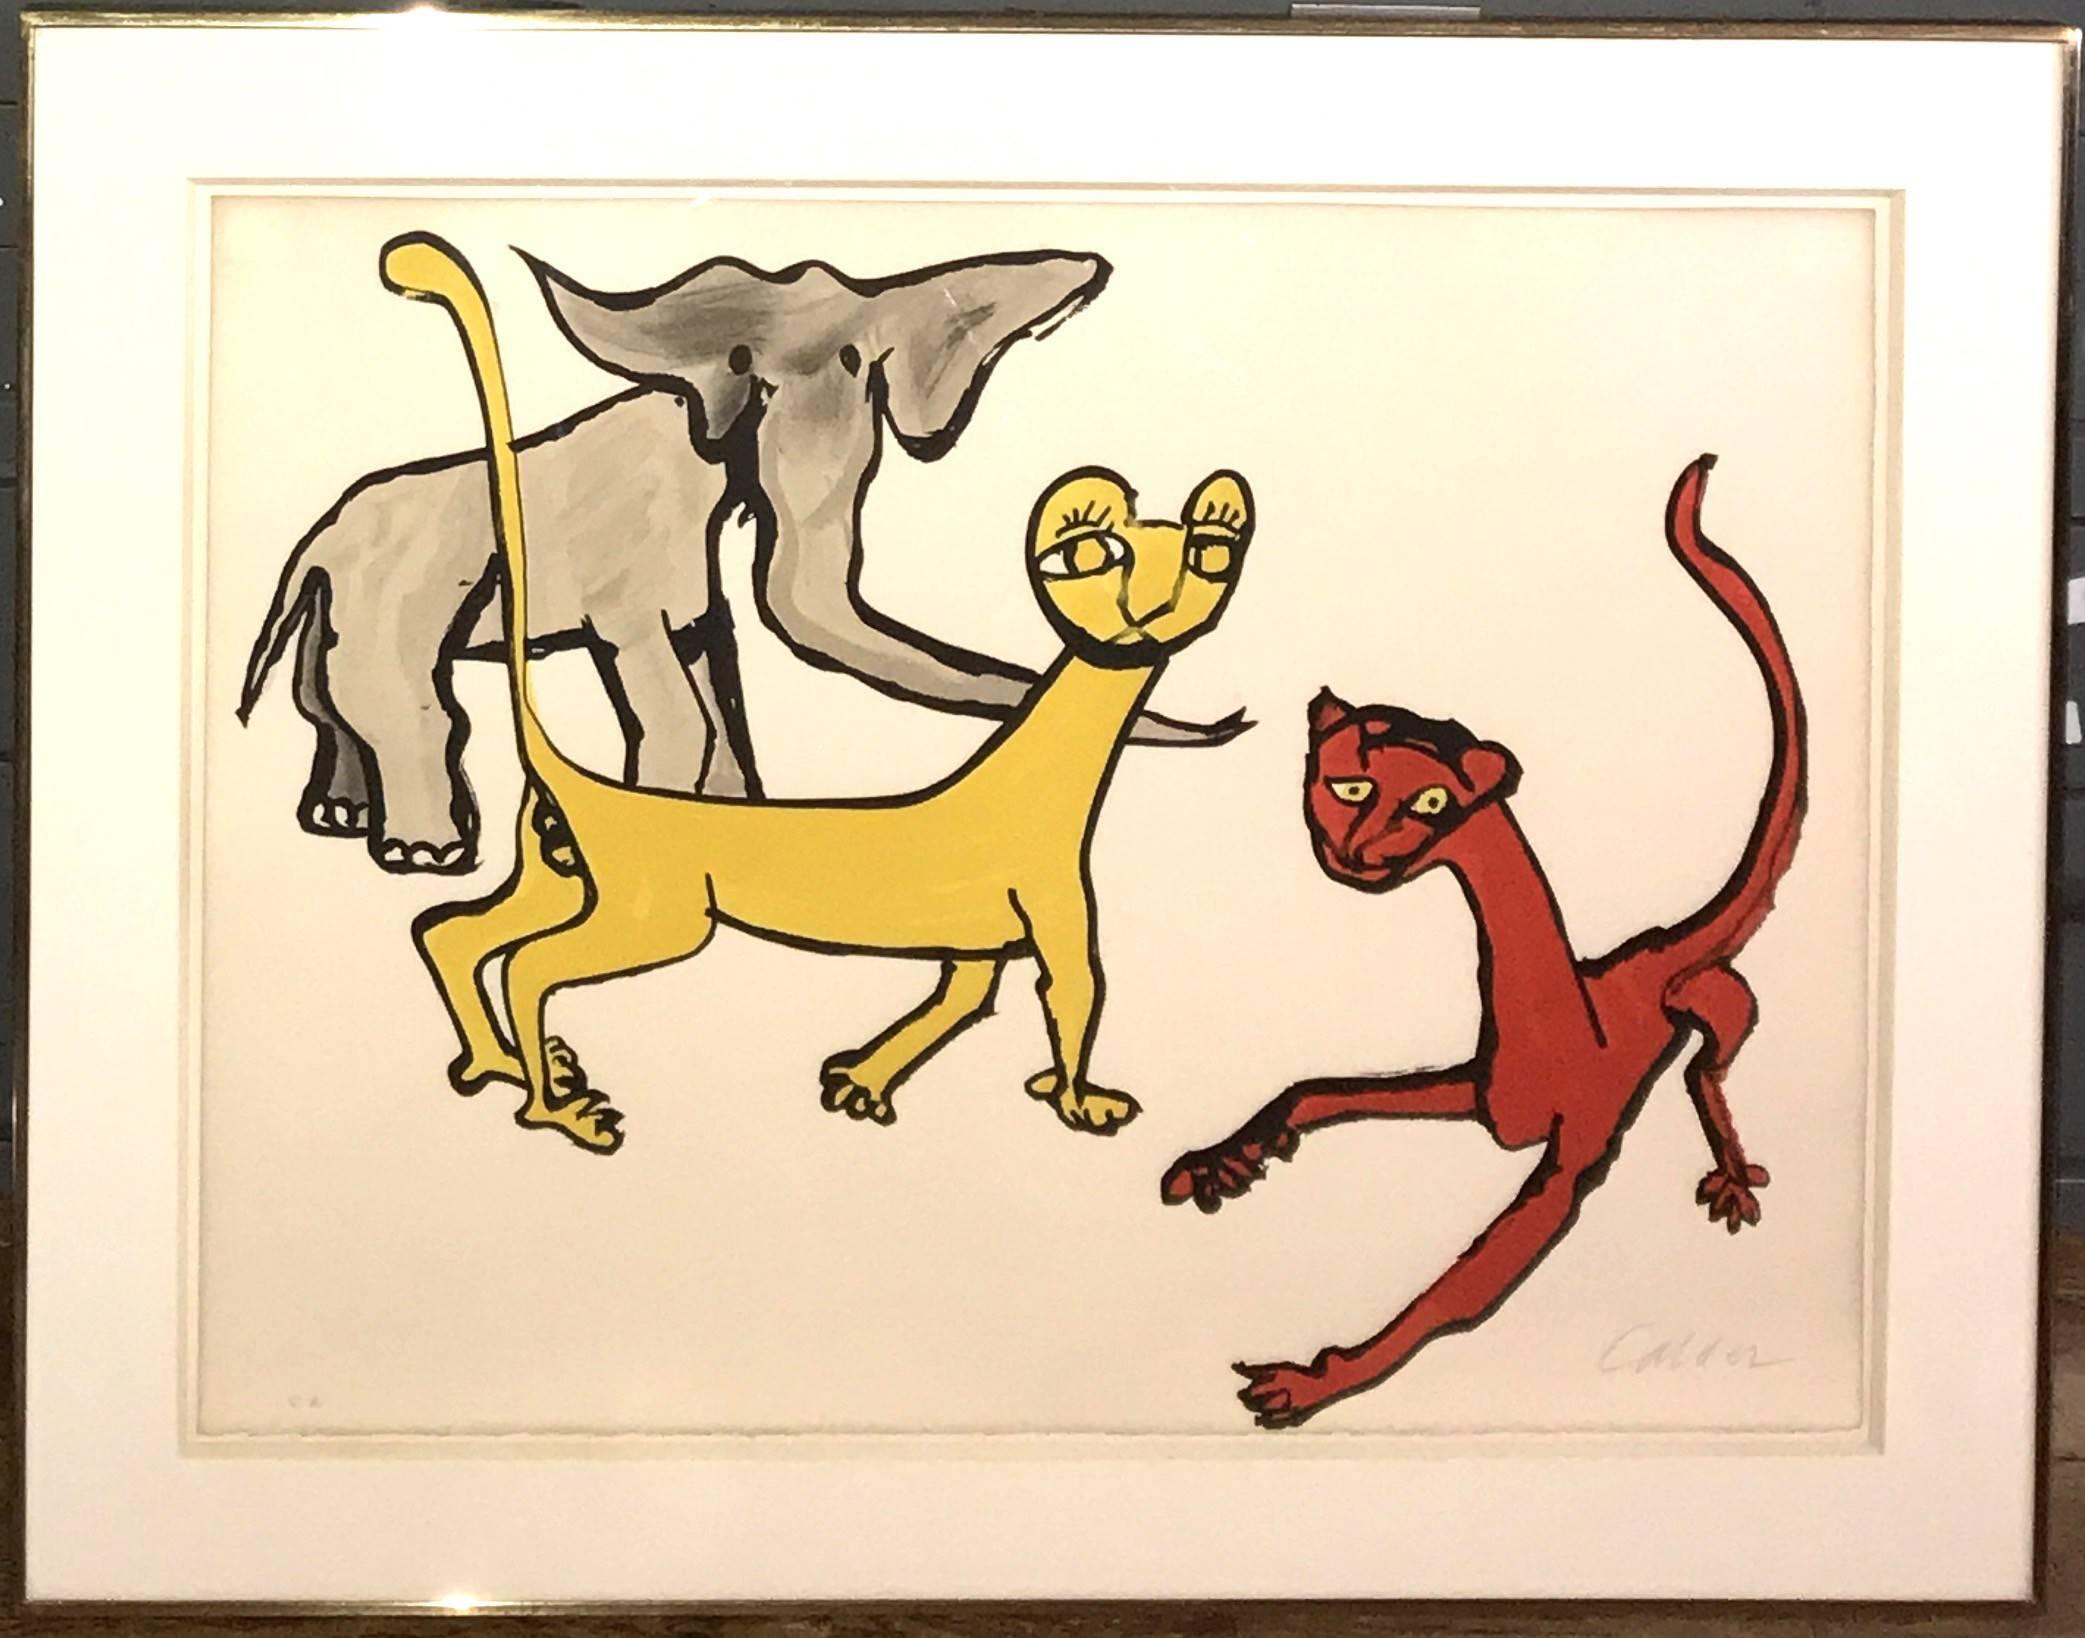 Animals, from Our Unfinished Revolution - Print by Alexander Calder